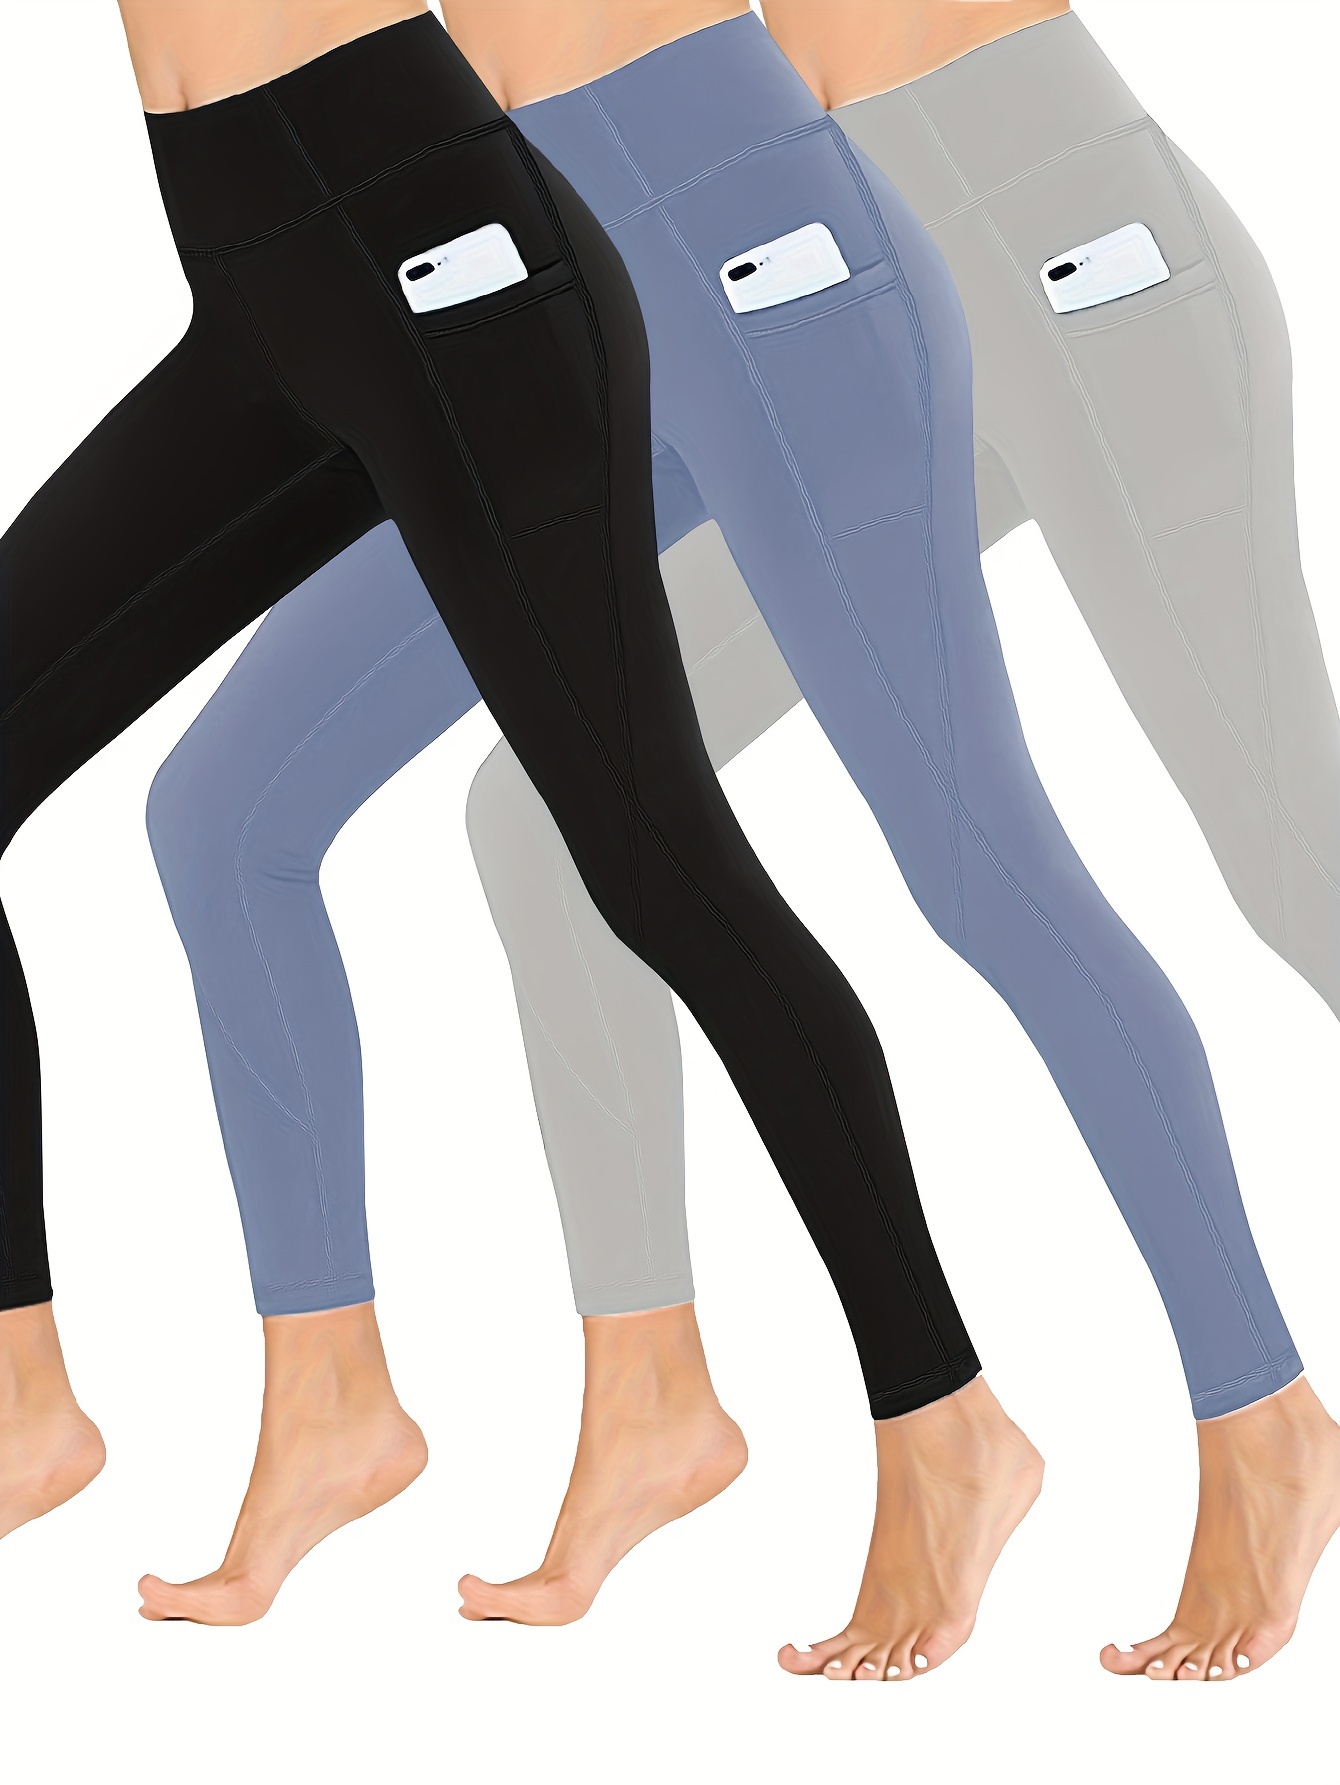 Womens Compression Leggings For Yoga, Gym, Running, And Fitness